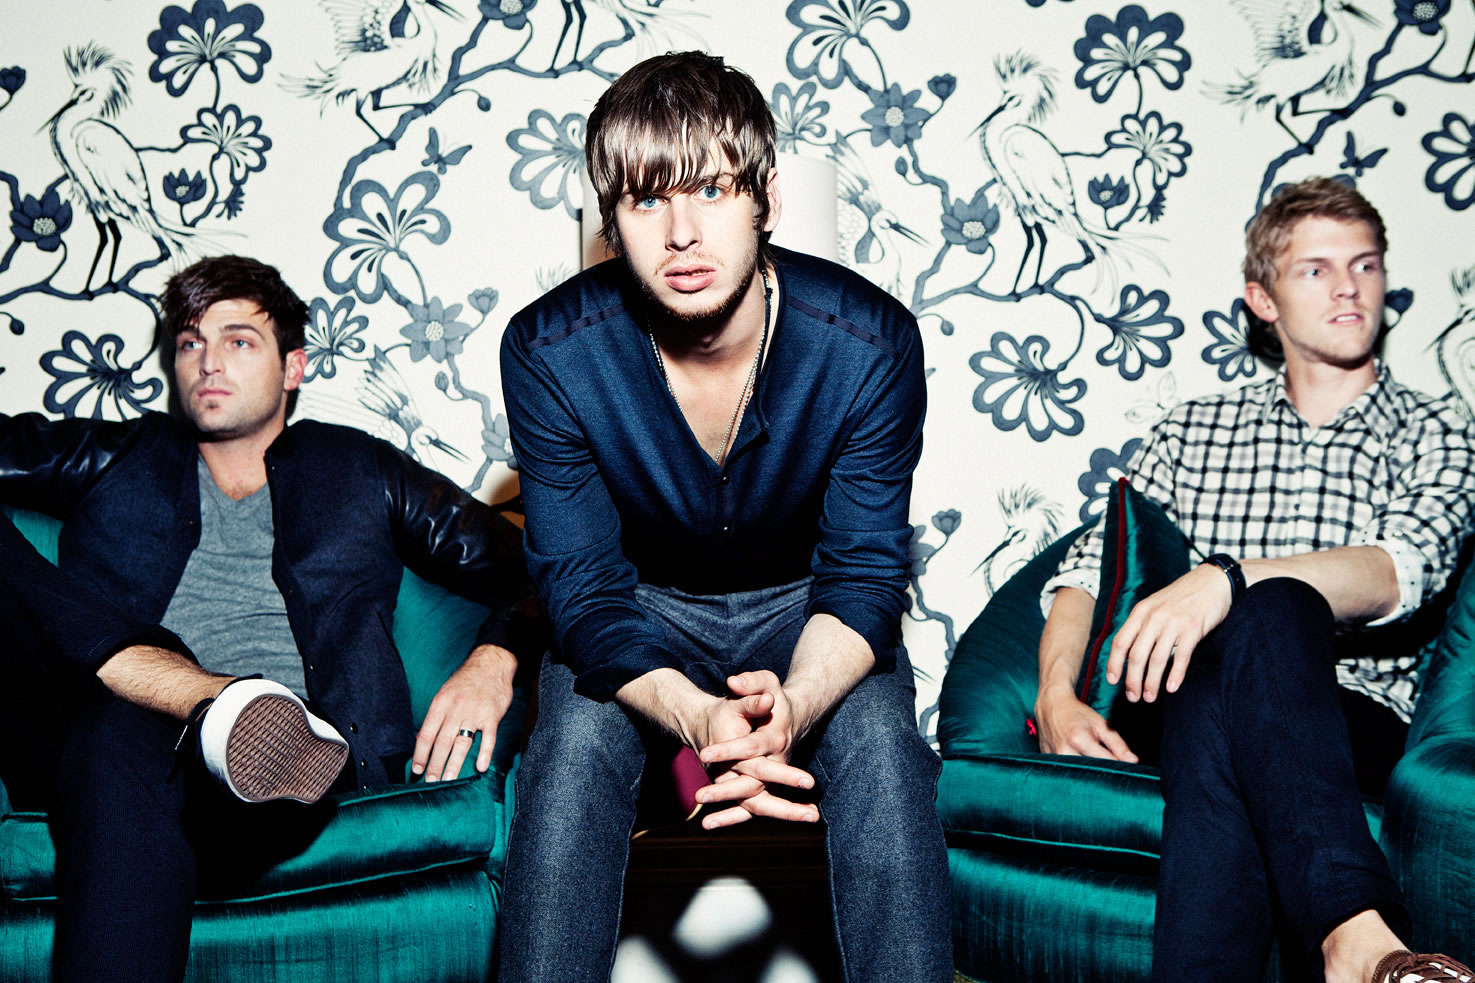 Indie pop band Foster the People, best known for the hit &quot;Pumped Up Kicks,&quot; will perform June 27 at the Edgefield Ampitheater in Troutdale, Ore.